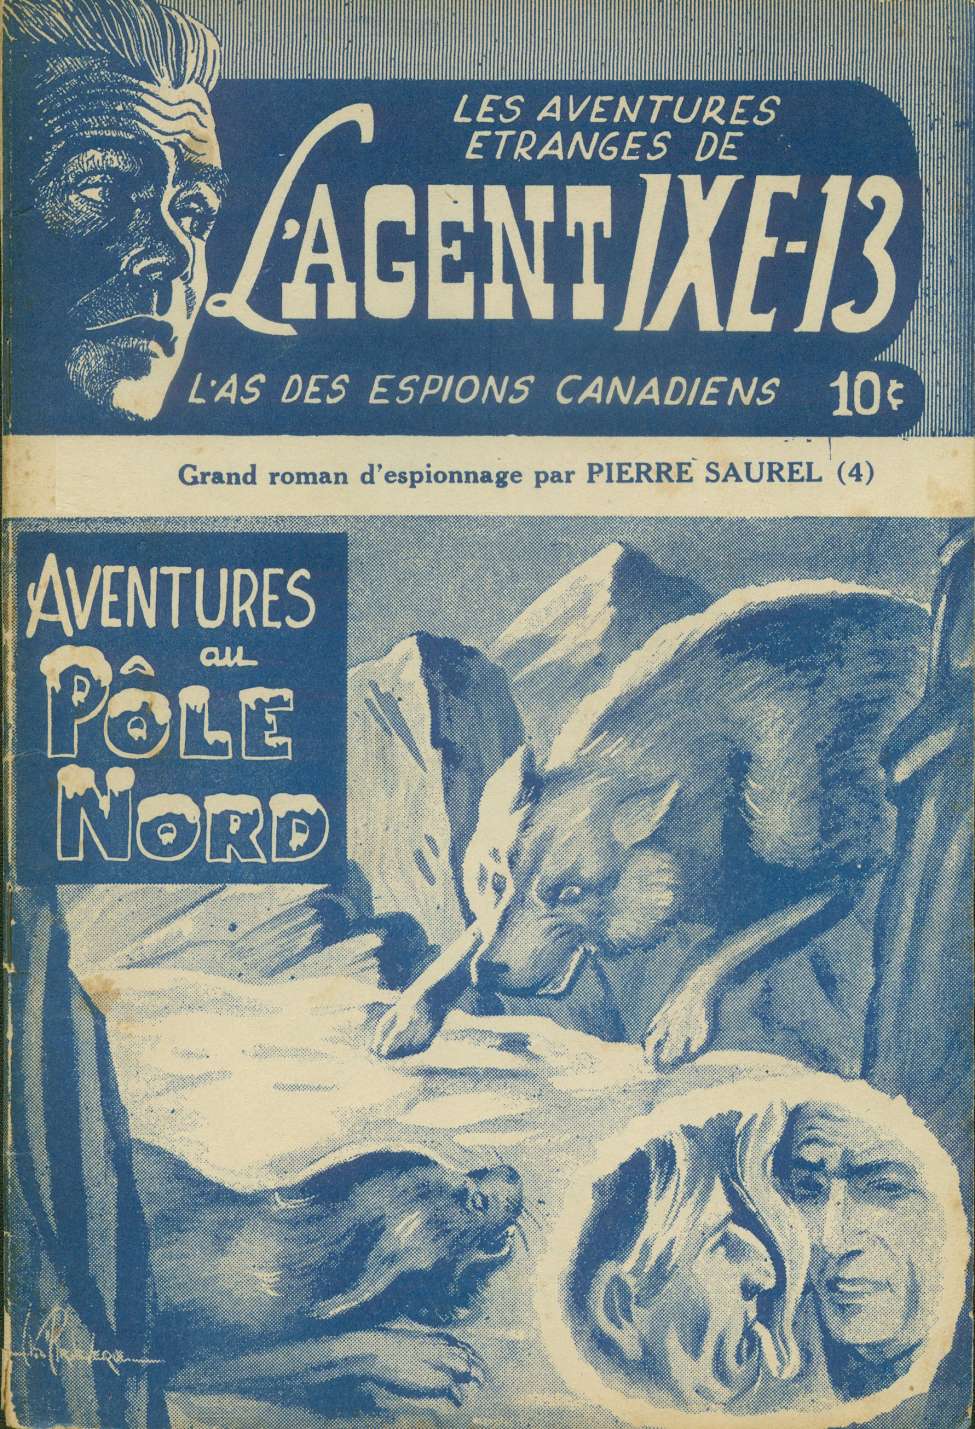 Comic Book Cover For L'Agent IXE-13 v2 4 – Aventures au pôle nord